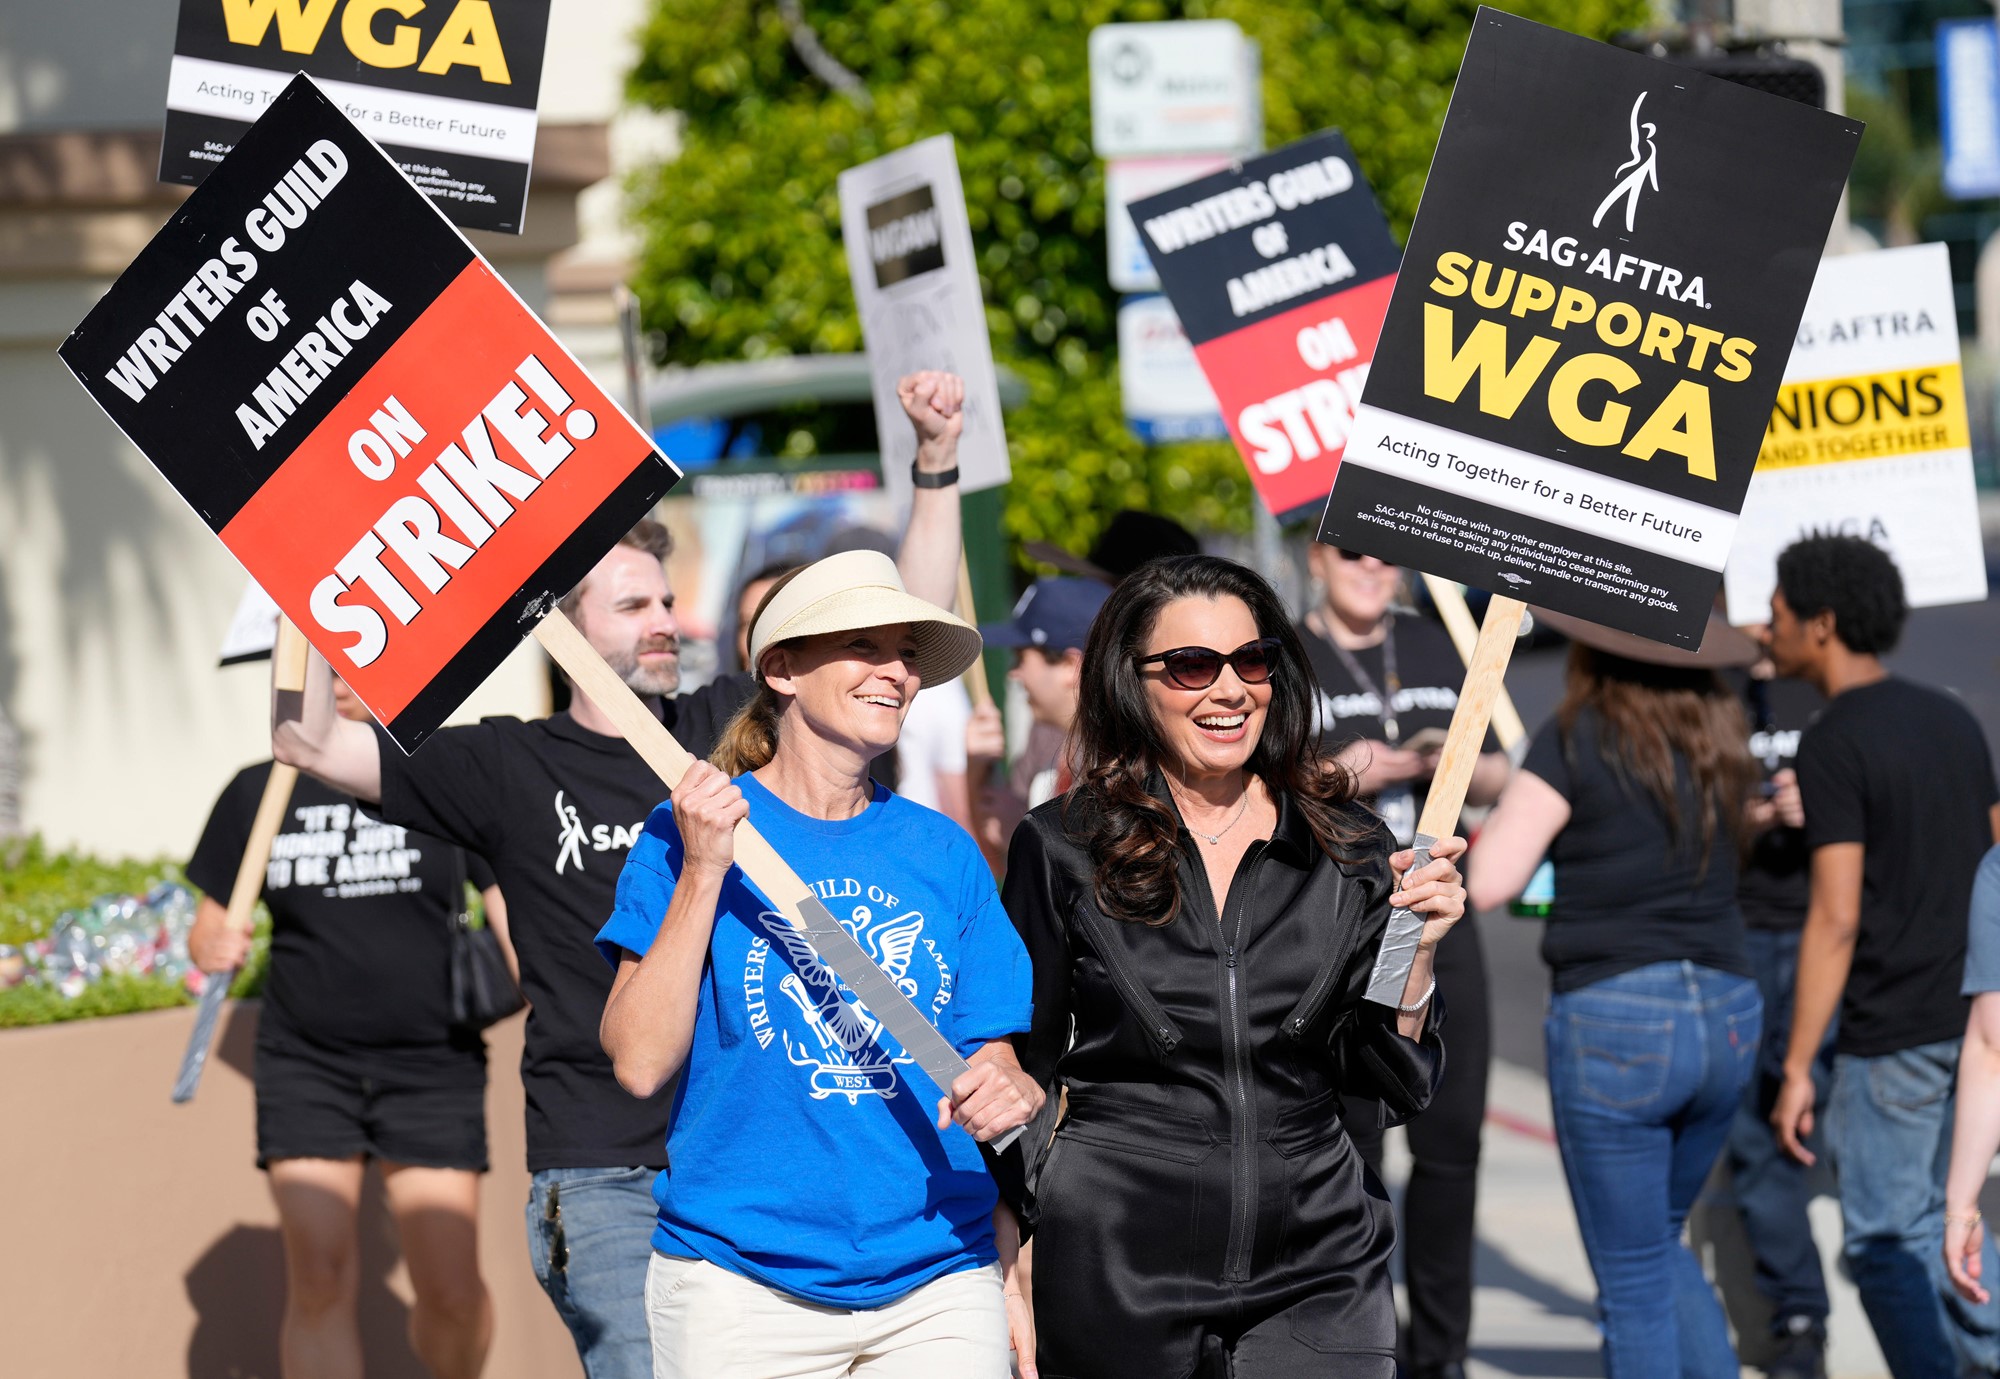 Fran Drescher in black velvet tracksuit and Meredith Stiehm in blue T smile while holding protest signs